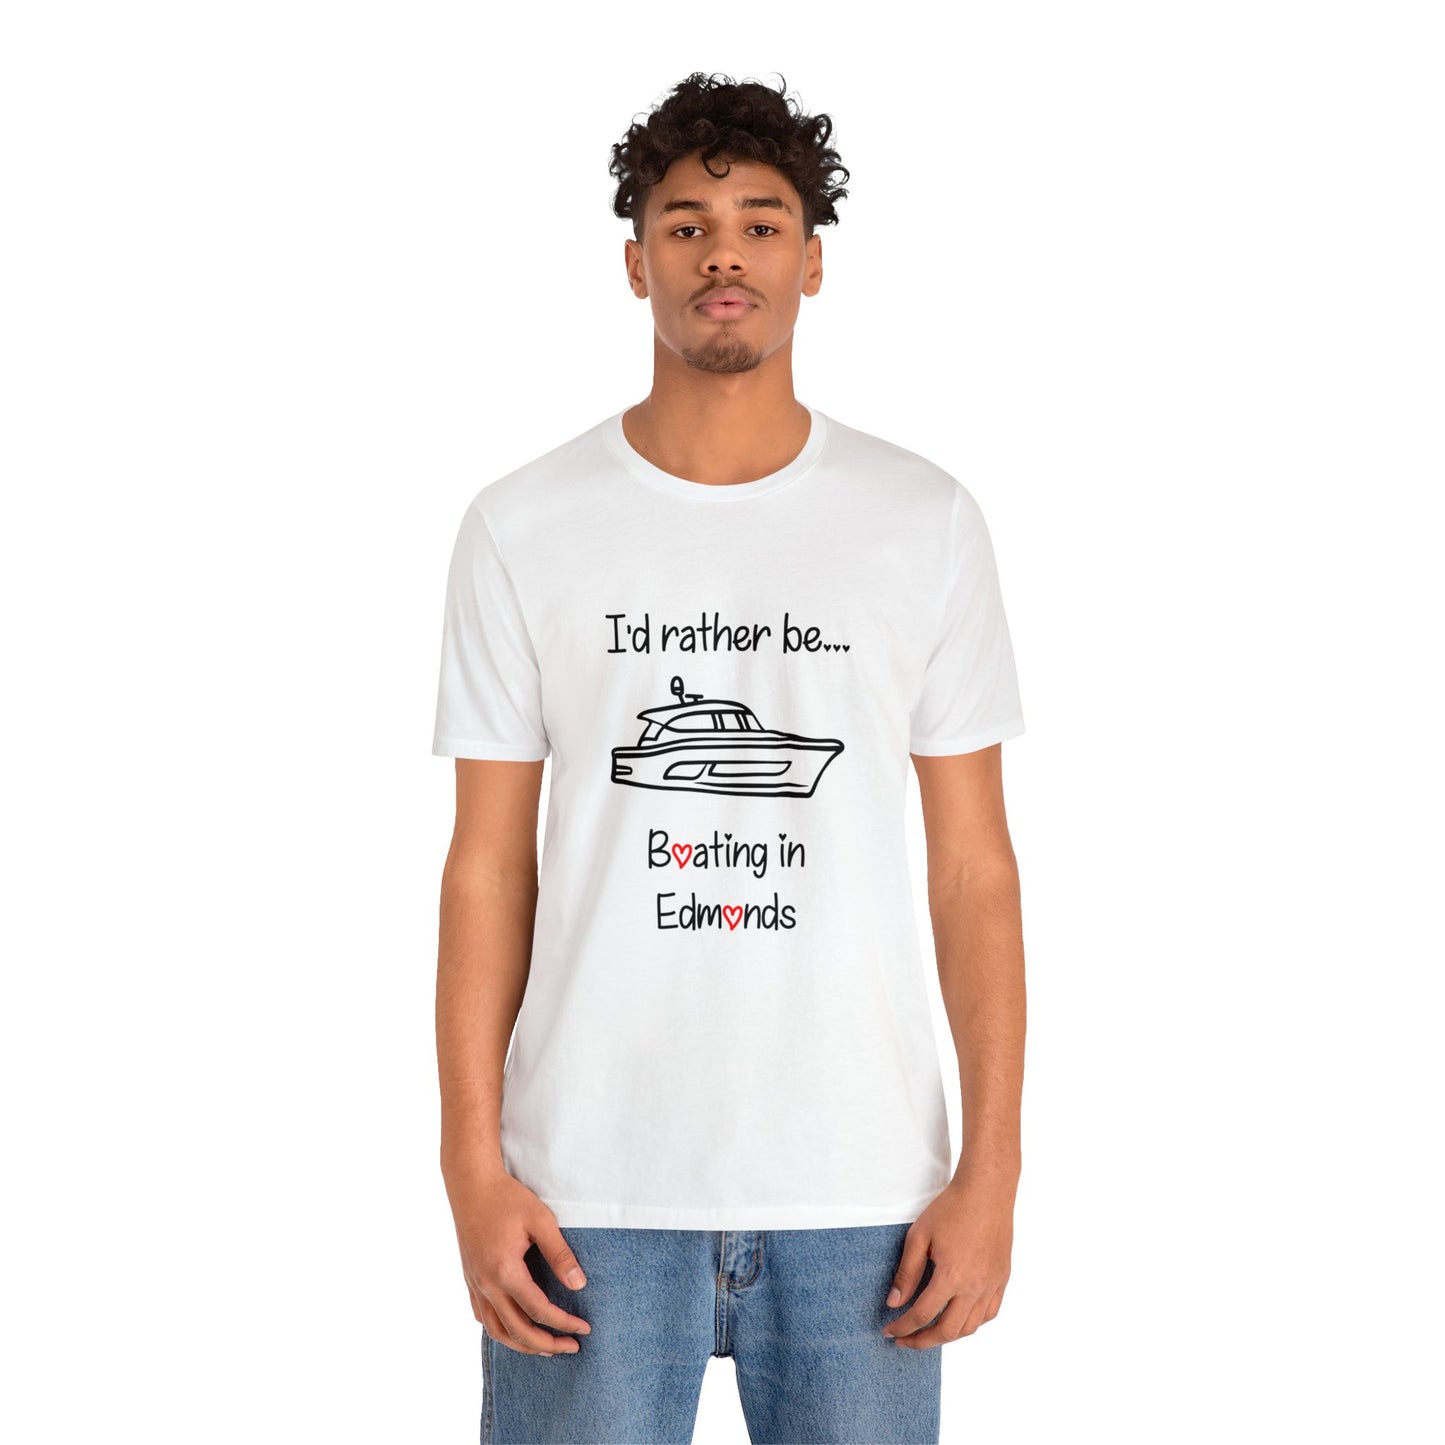 I'd rather be boating in Edmonds T-shirt